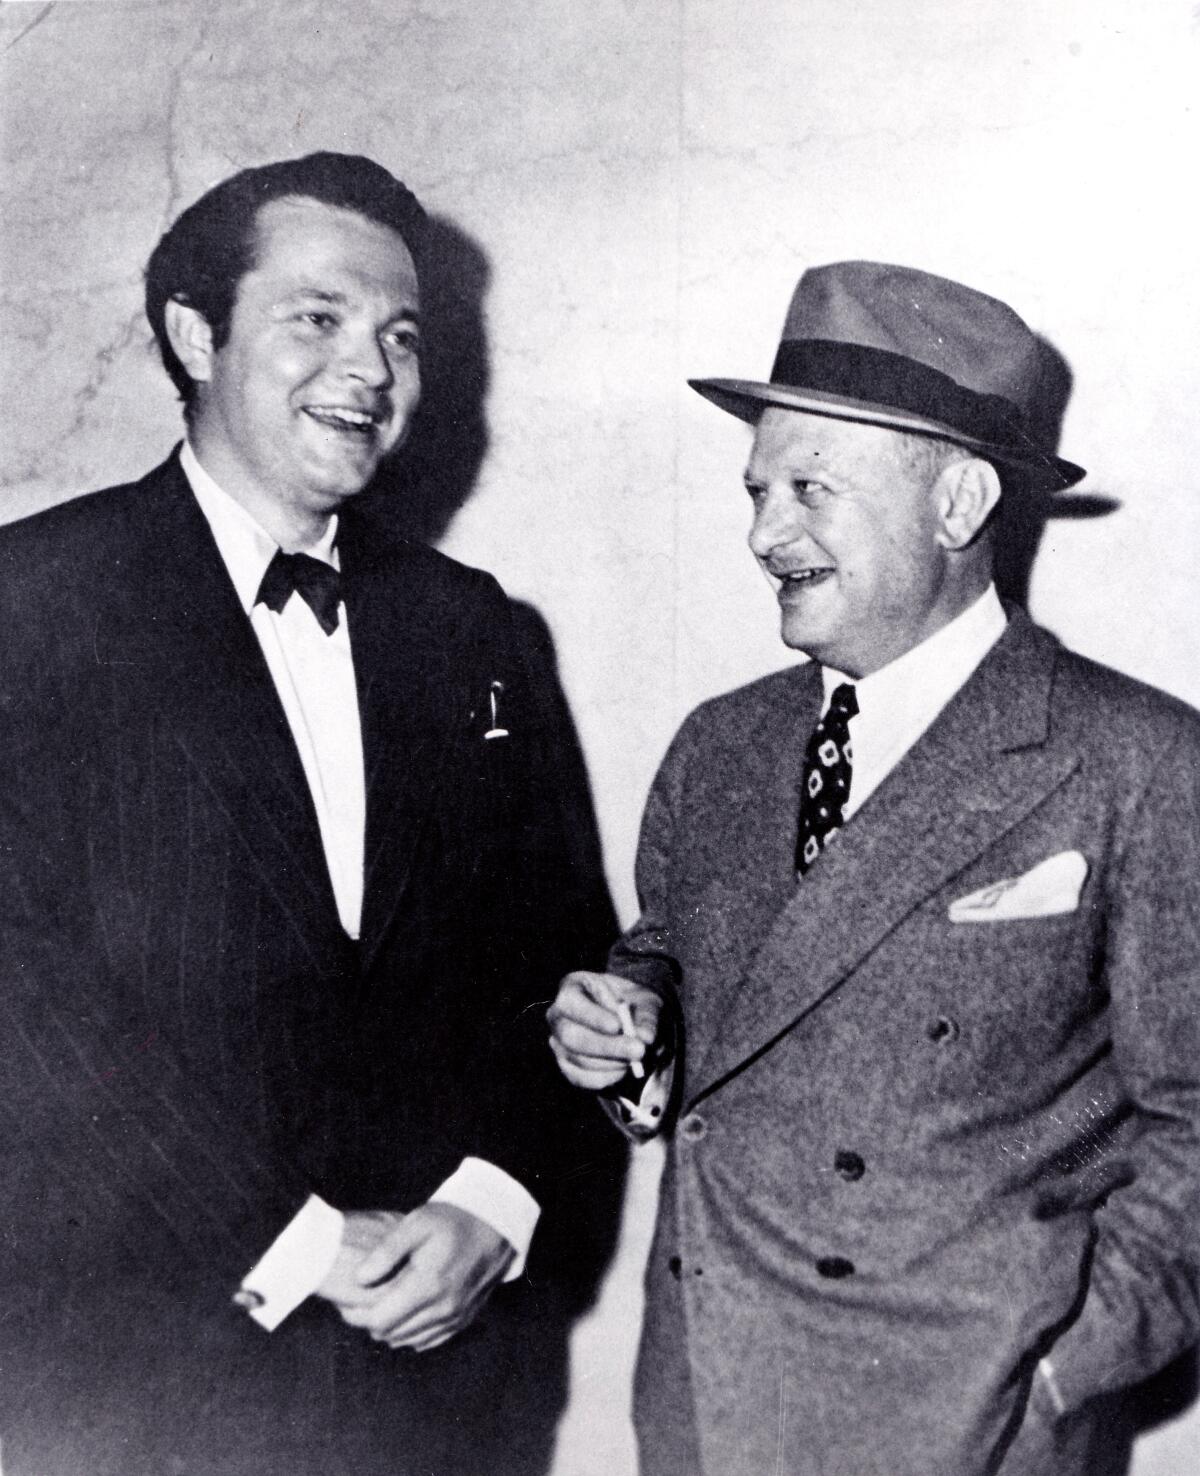 Herman Mankiewicz, right, and Orson Welles